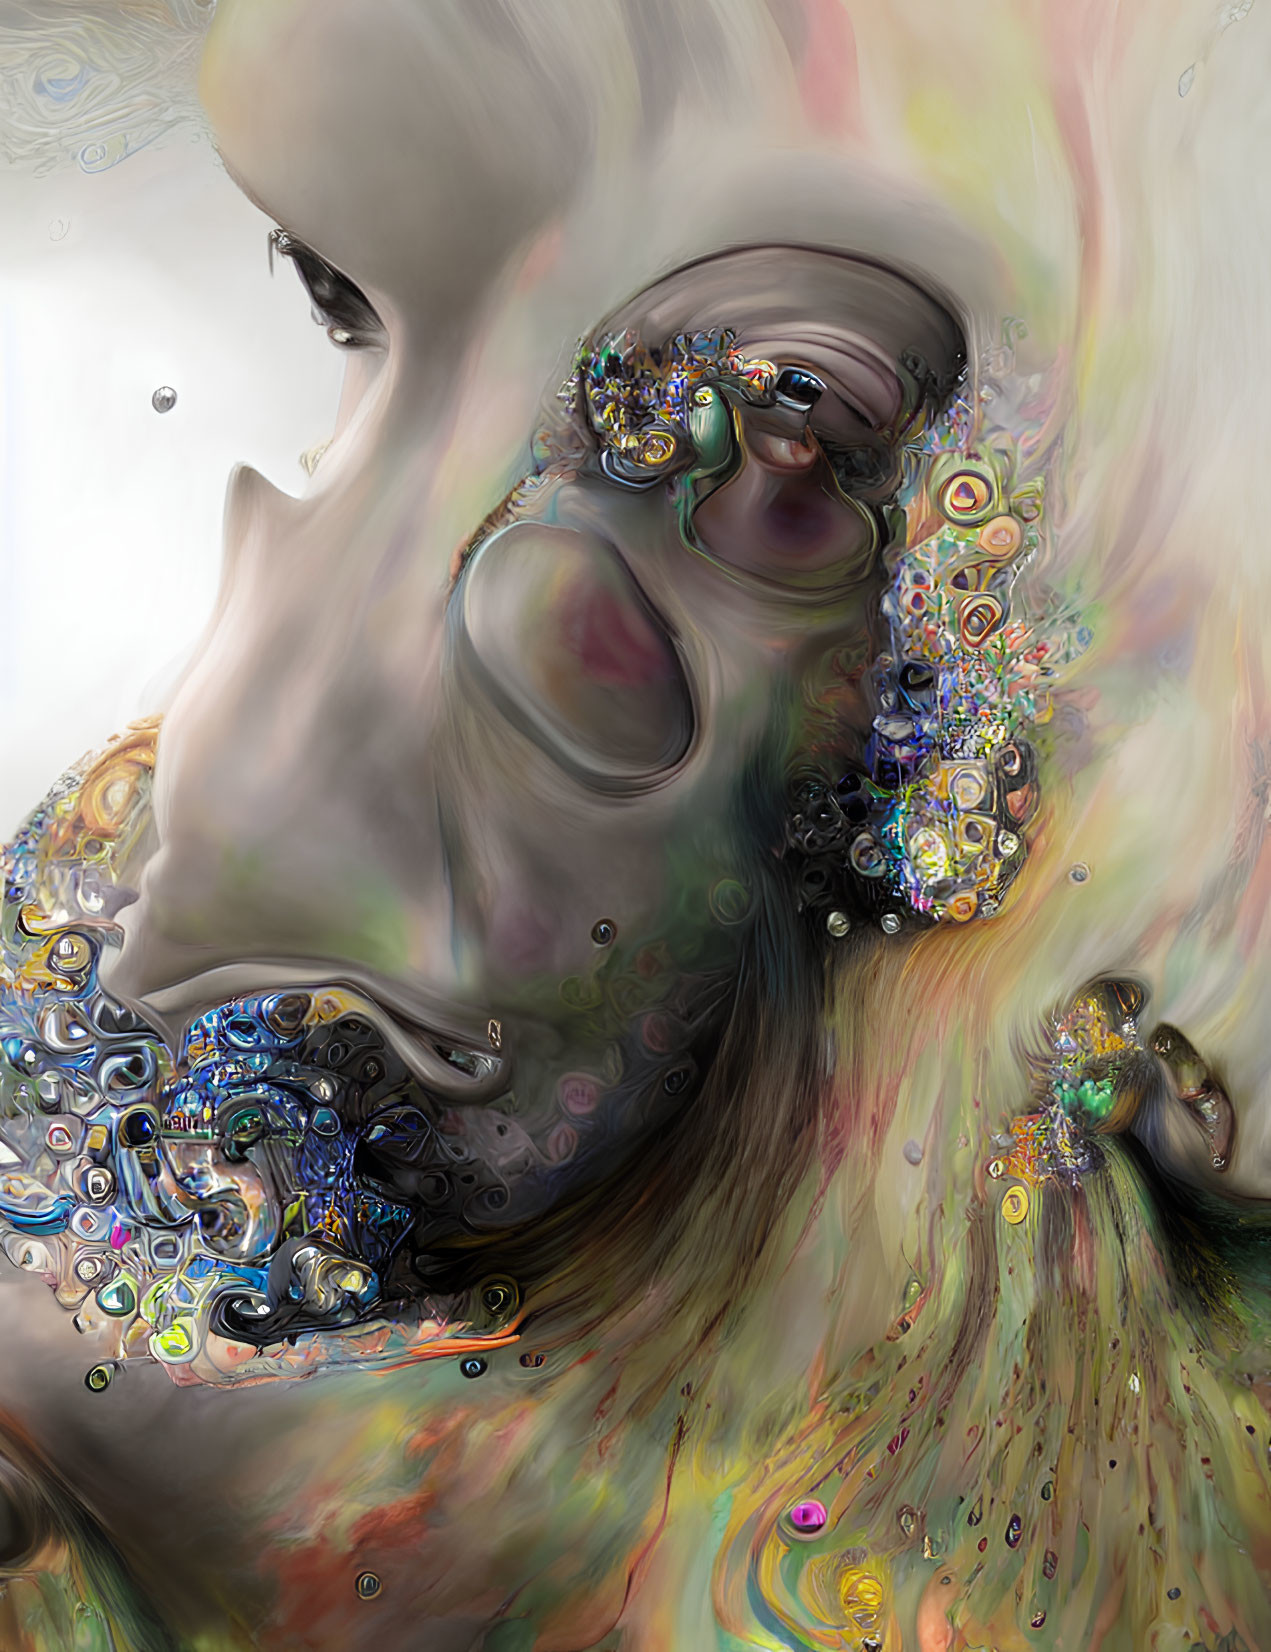 Abstract surreal portrait with colorful organic forms and swirling patterns.